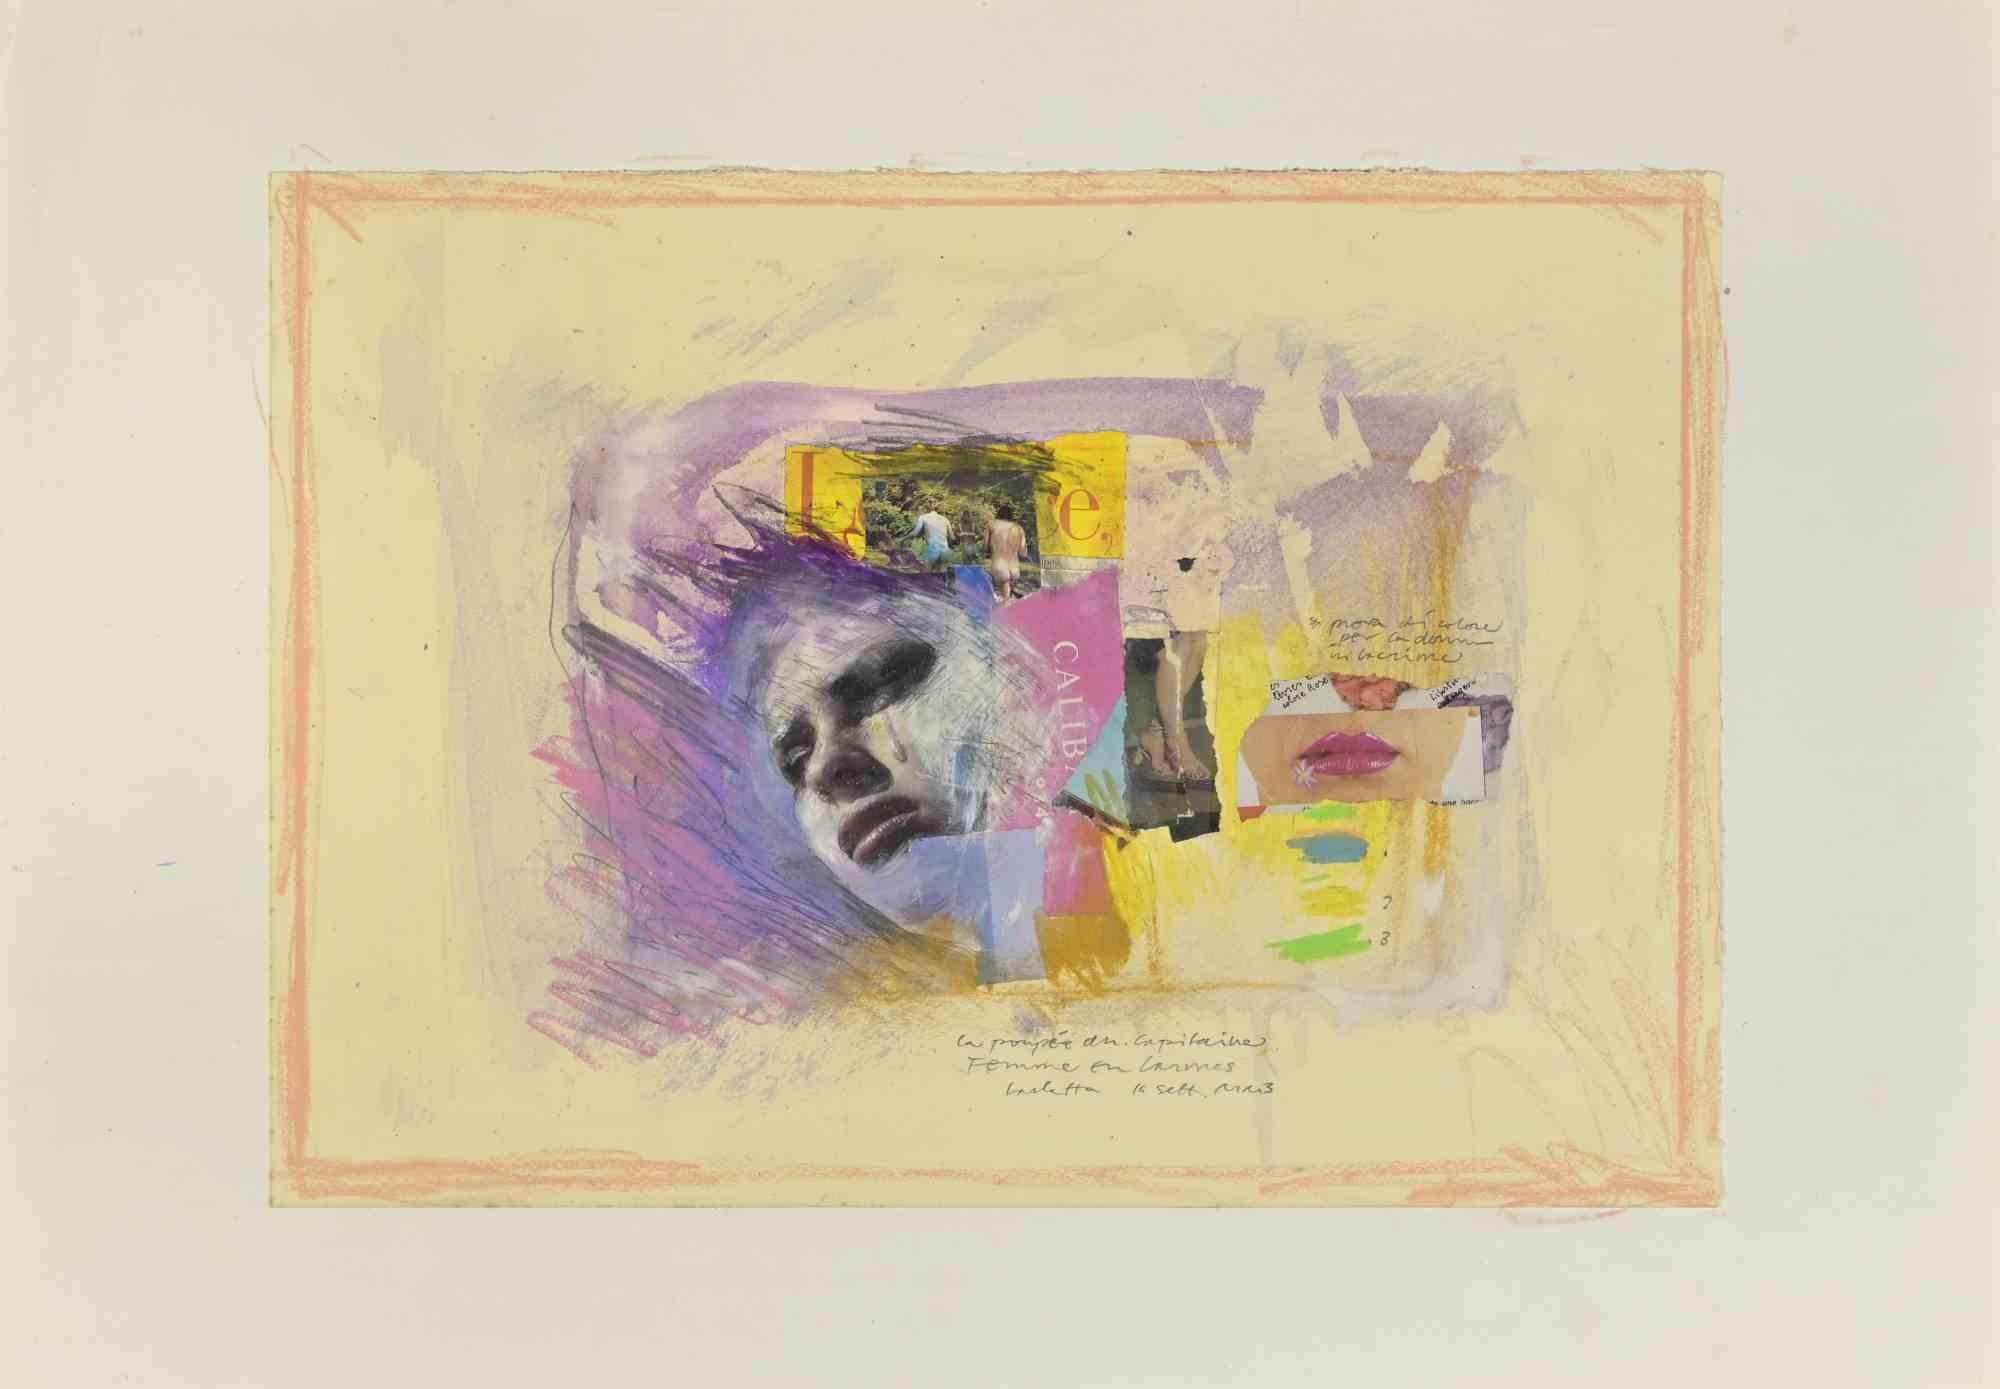 Femme en Larmes is a mixed media artwork, realized by Sergio Barletta in 1993.

Pastel, Watercolor, and Collage on cardboard, applied on a white passepartout. 50x 70 cm.

Hand-signed on the lower margin. 

Good conditions.

Sergio Barletta (1934) is